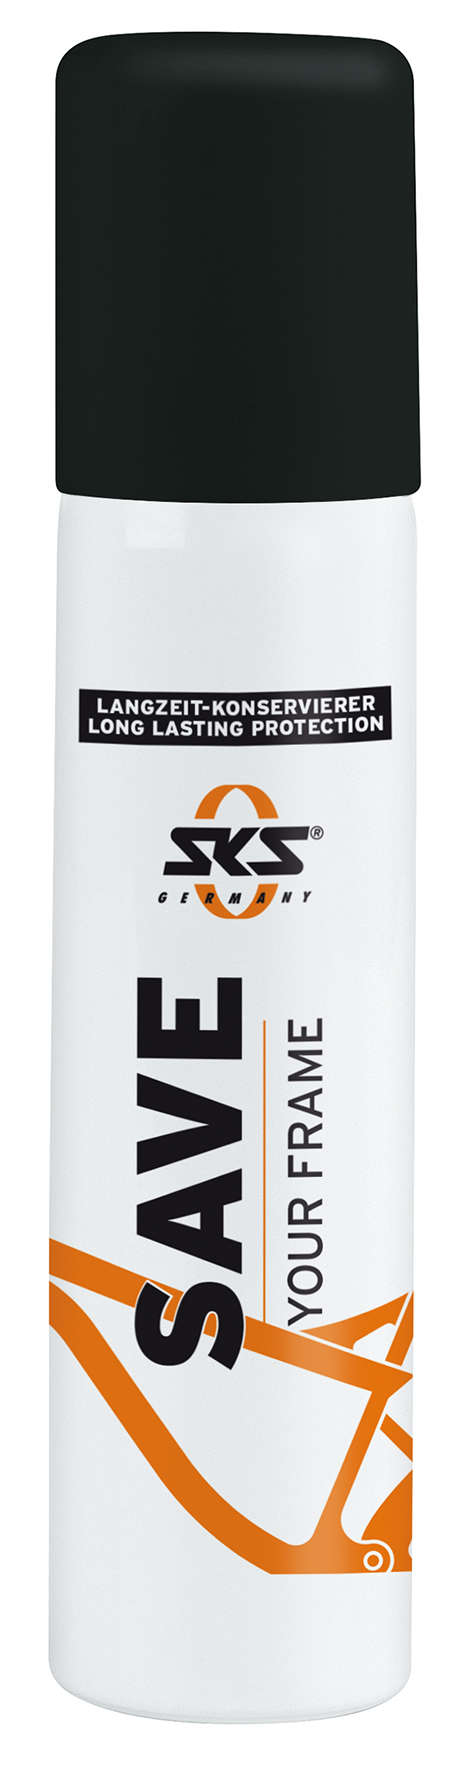 SKS Save Your Frame Protectie